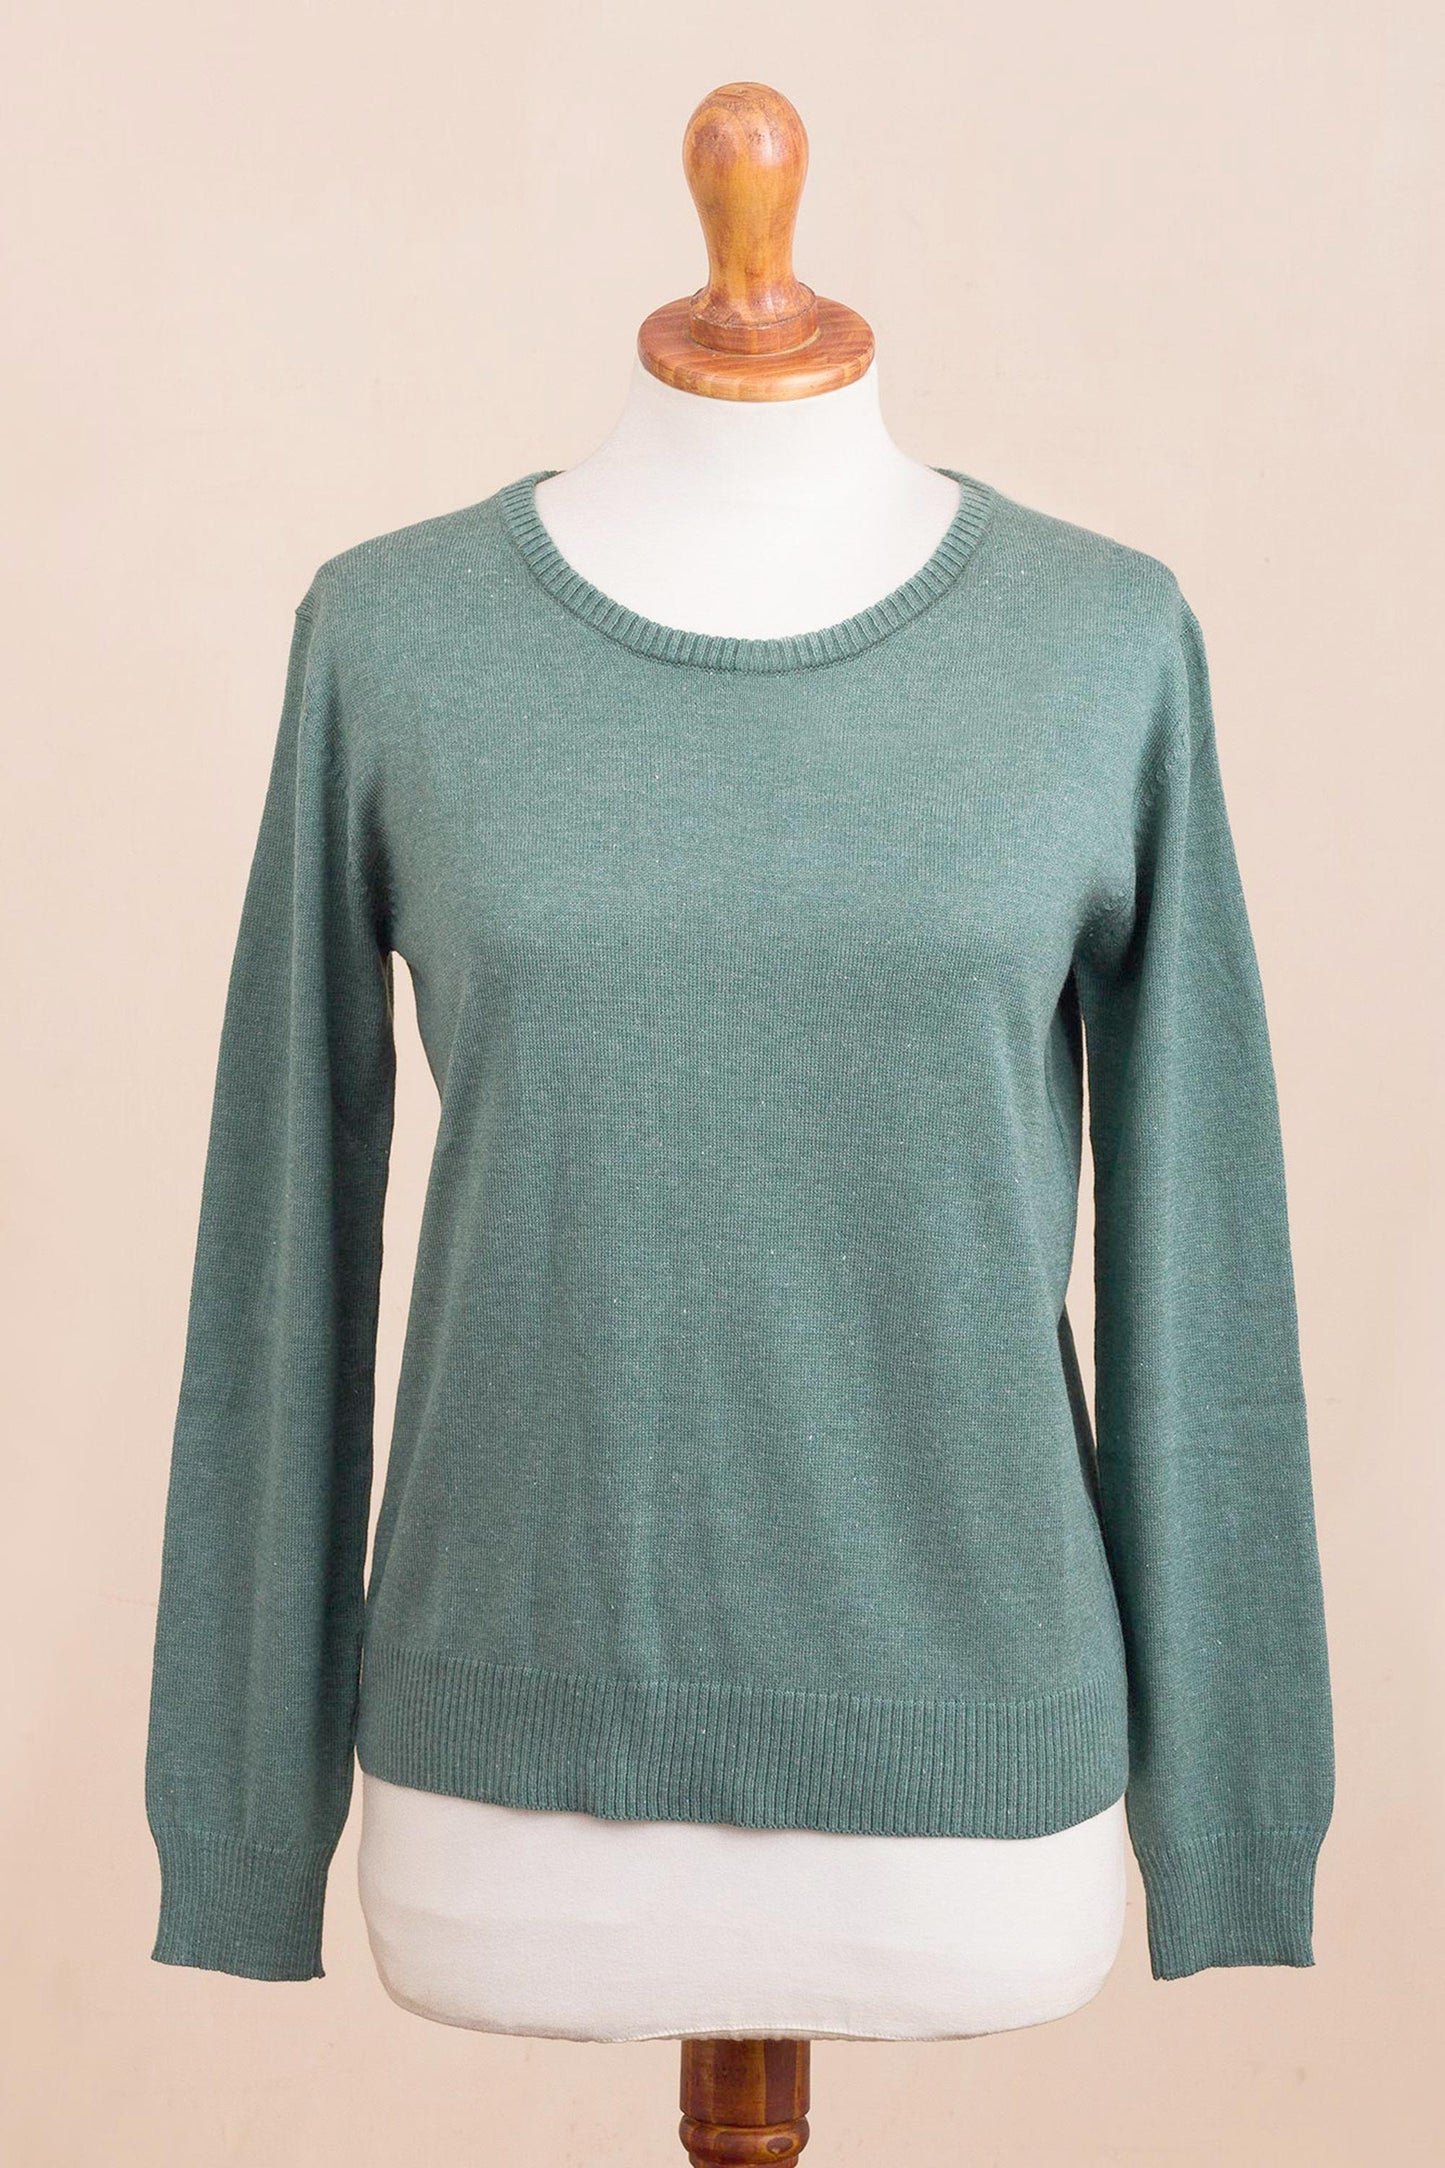 Warm Valley in Viridian Knit Cotton Blend Pullover in Viridian from Peru